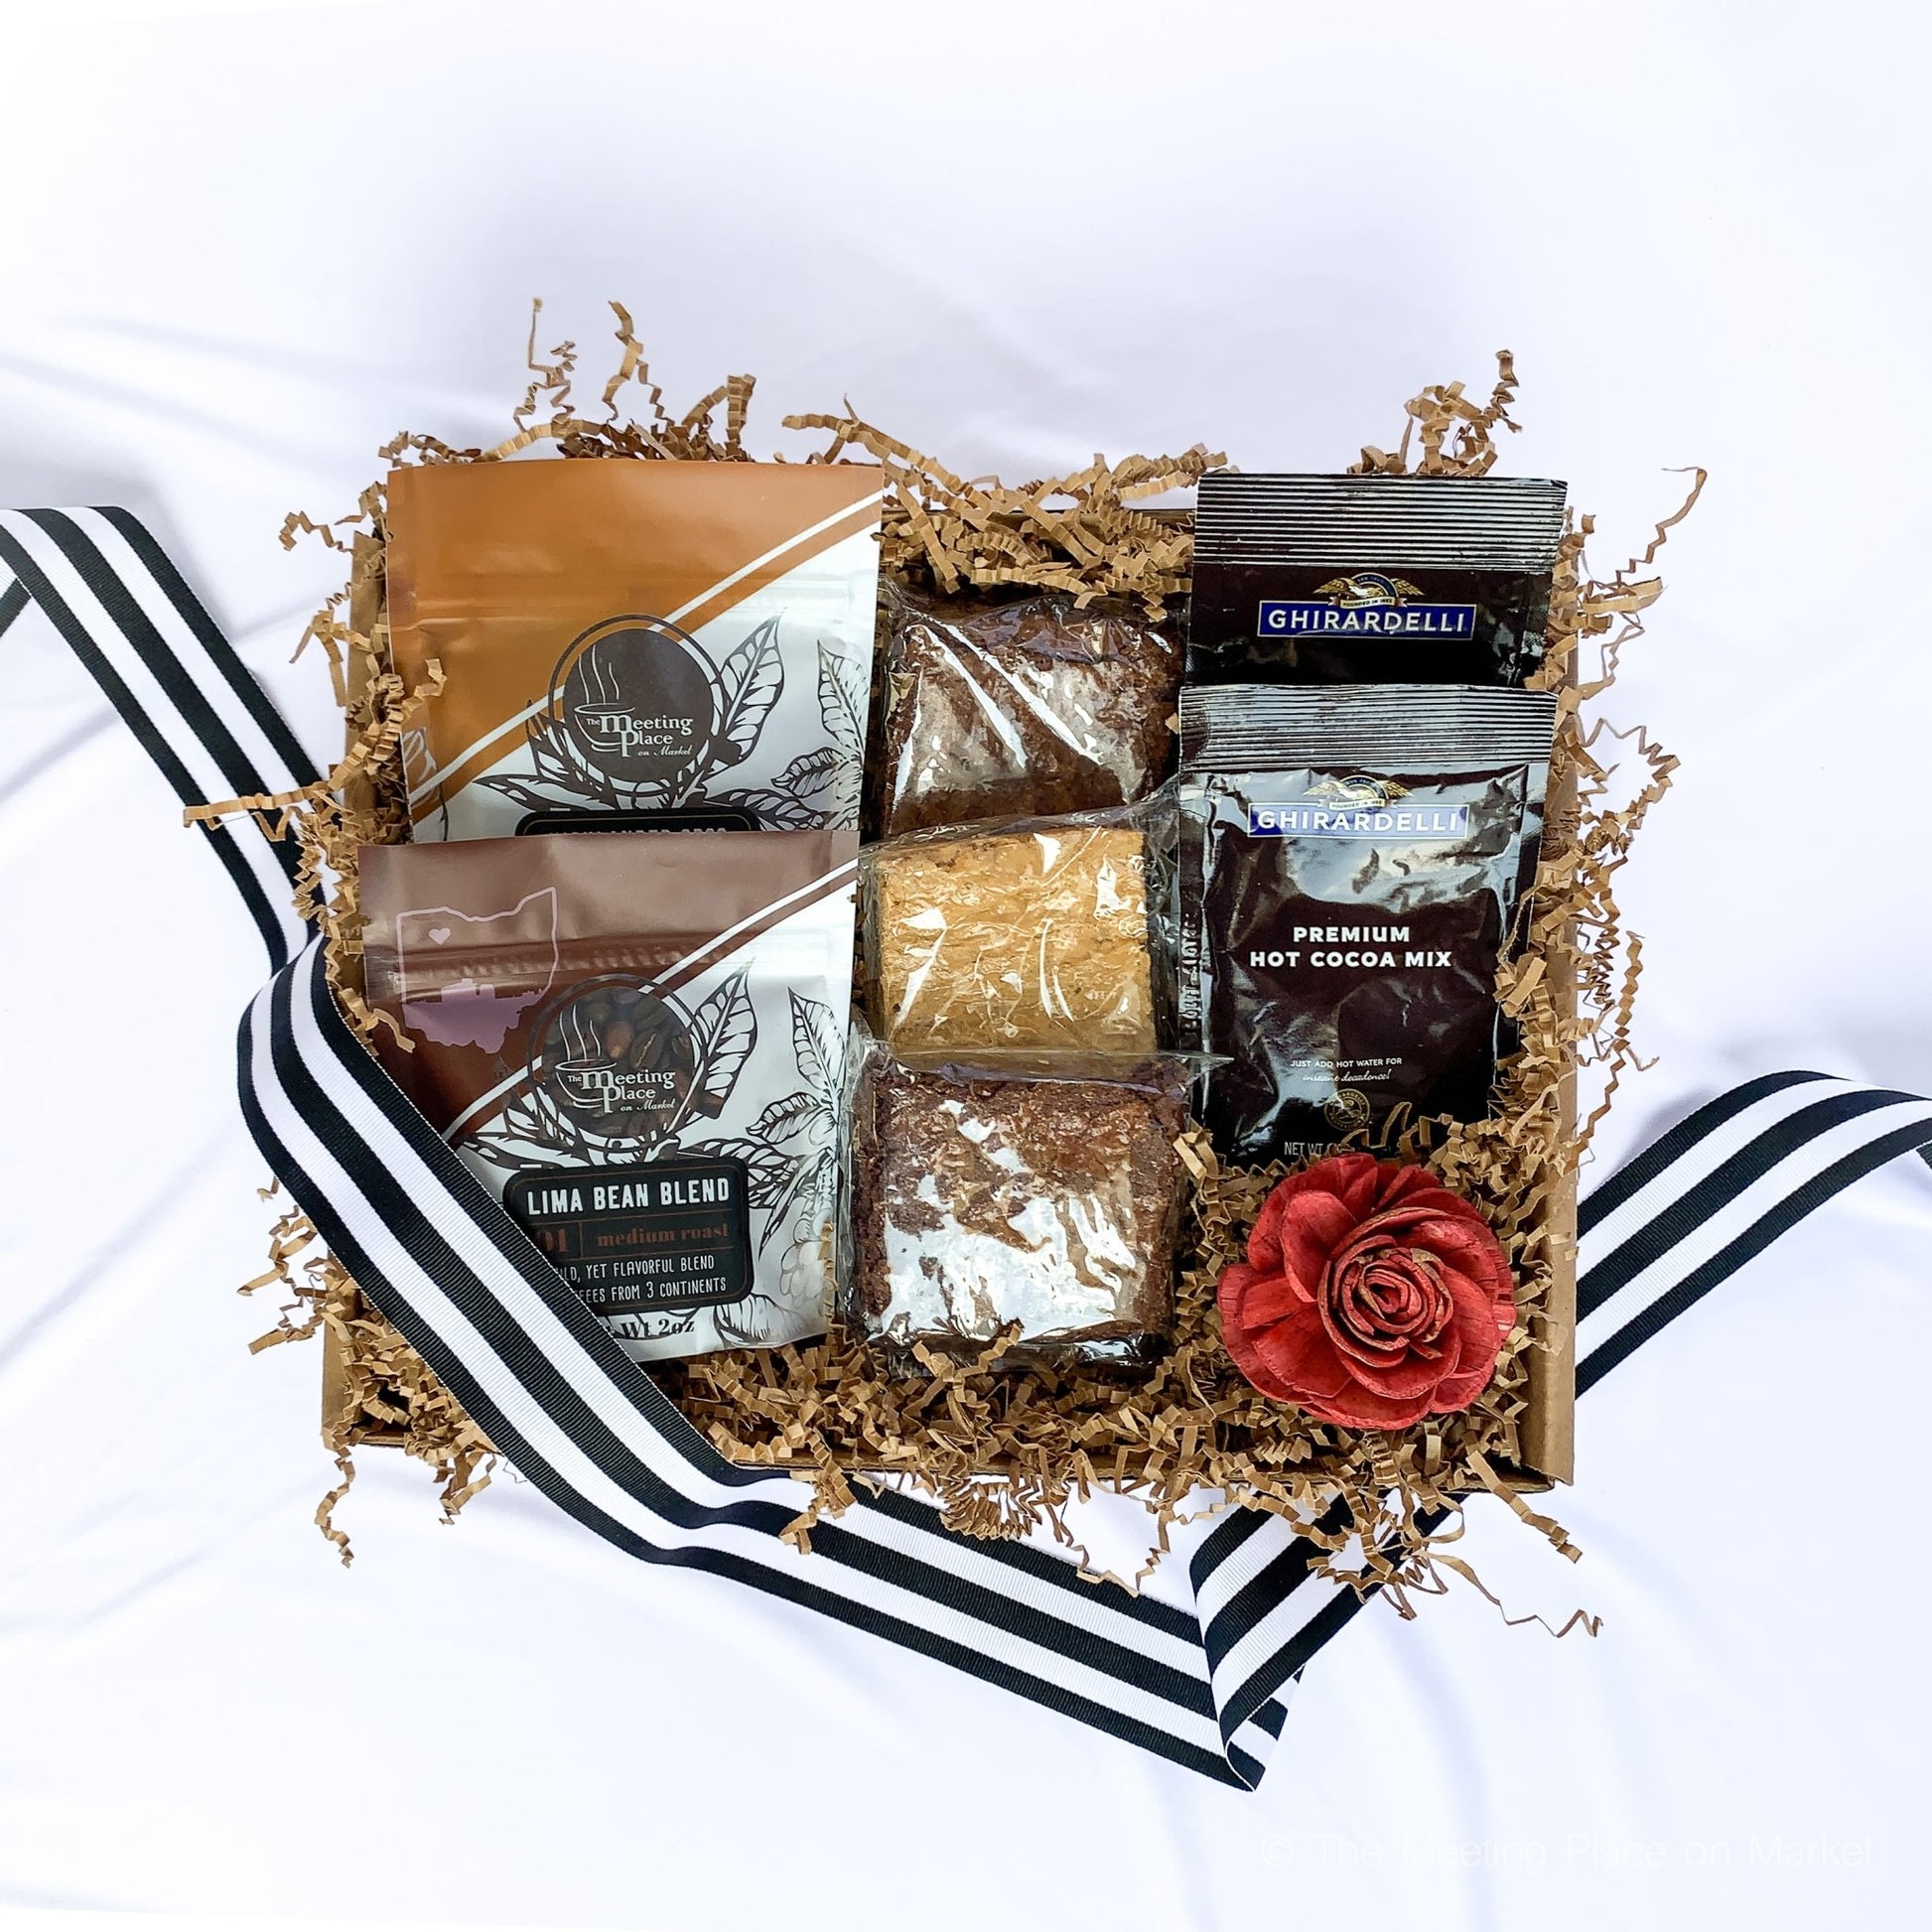  Bean Box Gourmet Coffee Sampler, Specialty Coffee Gift Basket, Coffee Gift Set, Coffee Gifts for Women and Men, Birthday Gifts for Her, Care Package